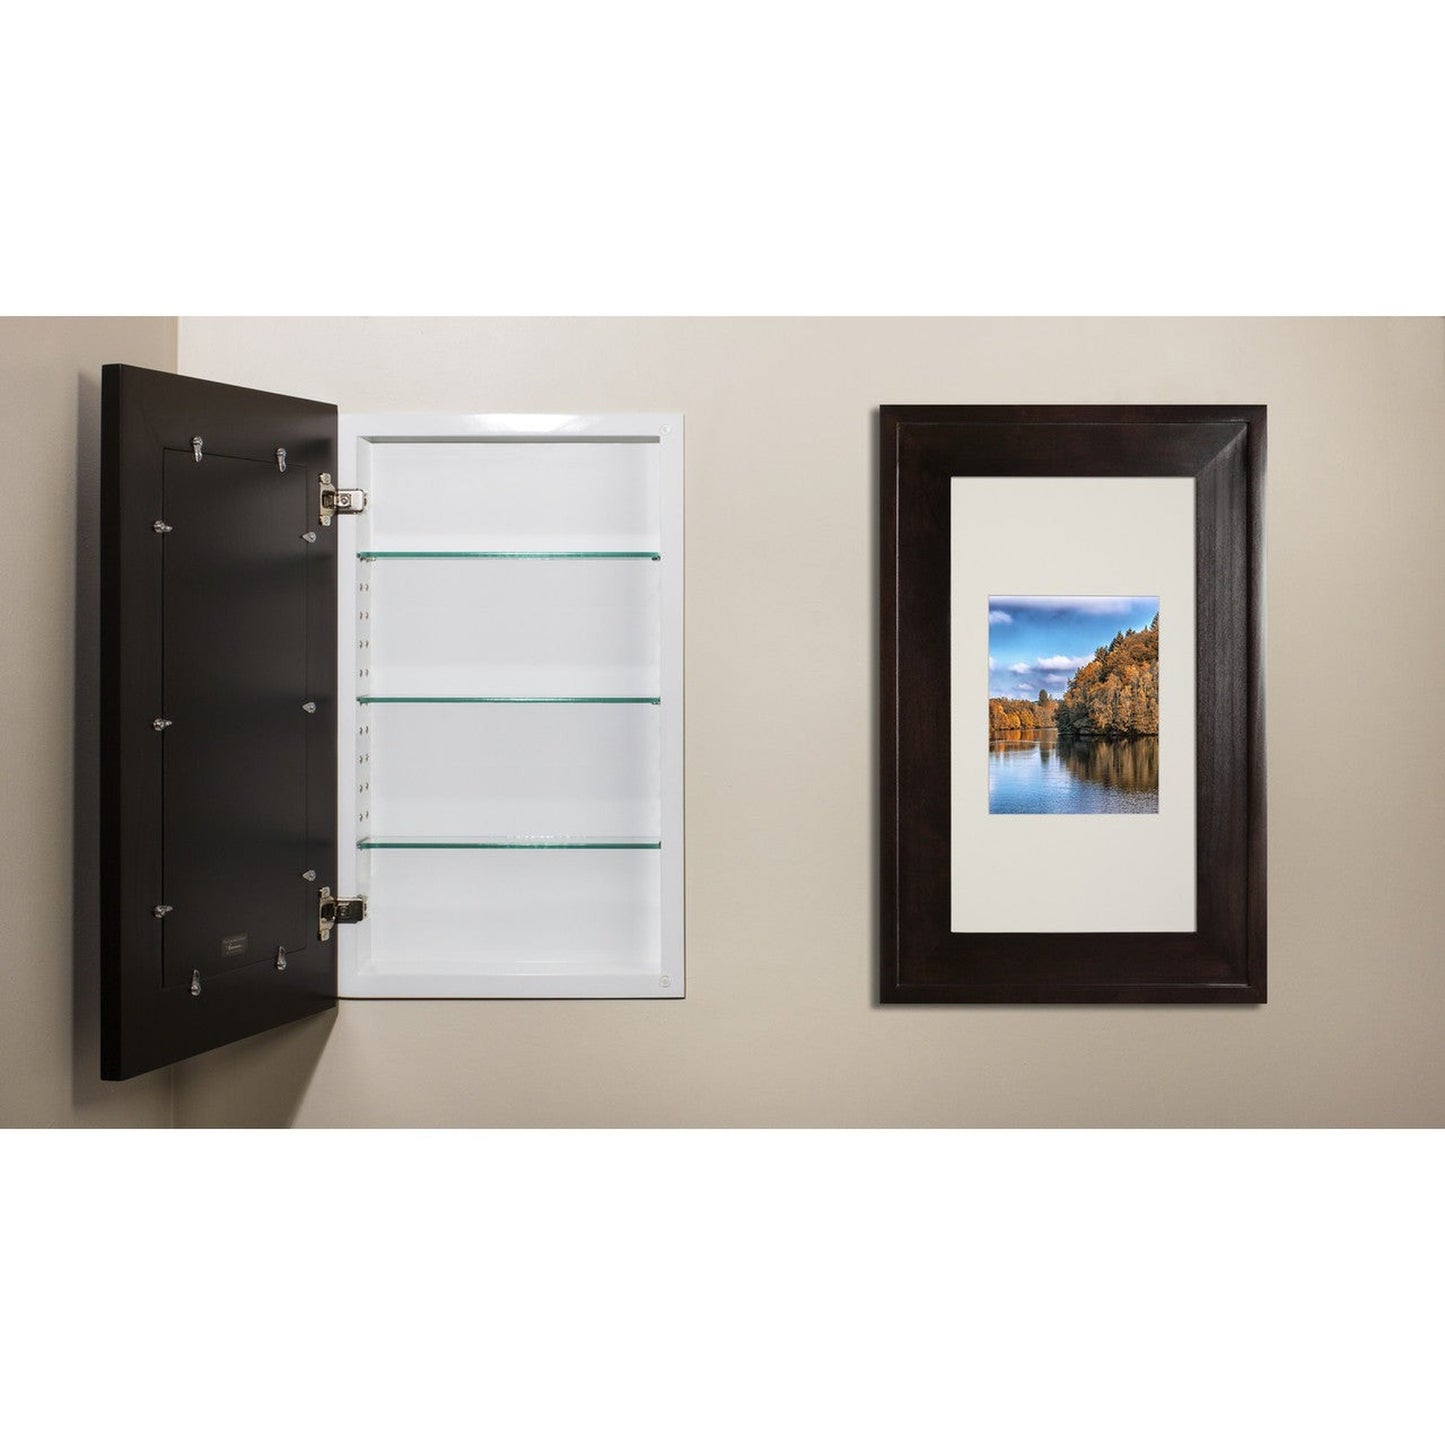 Fox Hollow Furnishings 14" x 24" Coffee Bean Extra Large White Interior Special 3" Depth Recessed Picture Frame Medicine Cabinet With White Matting